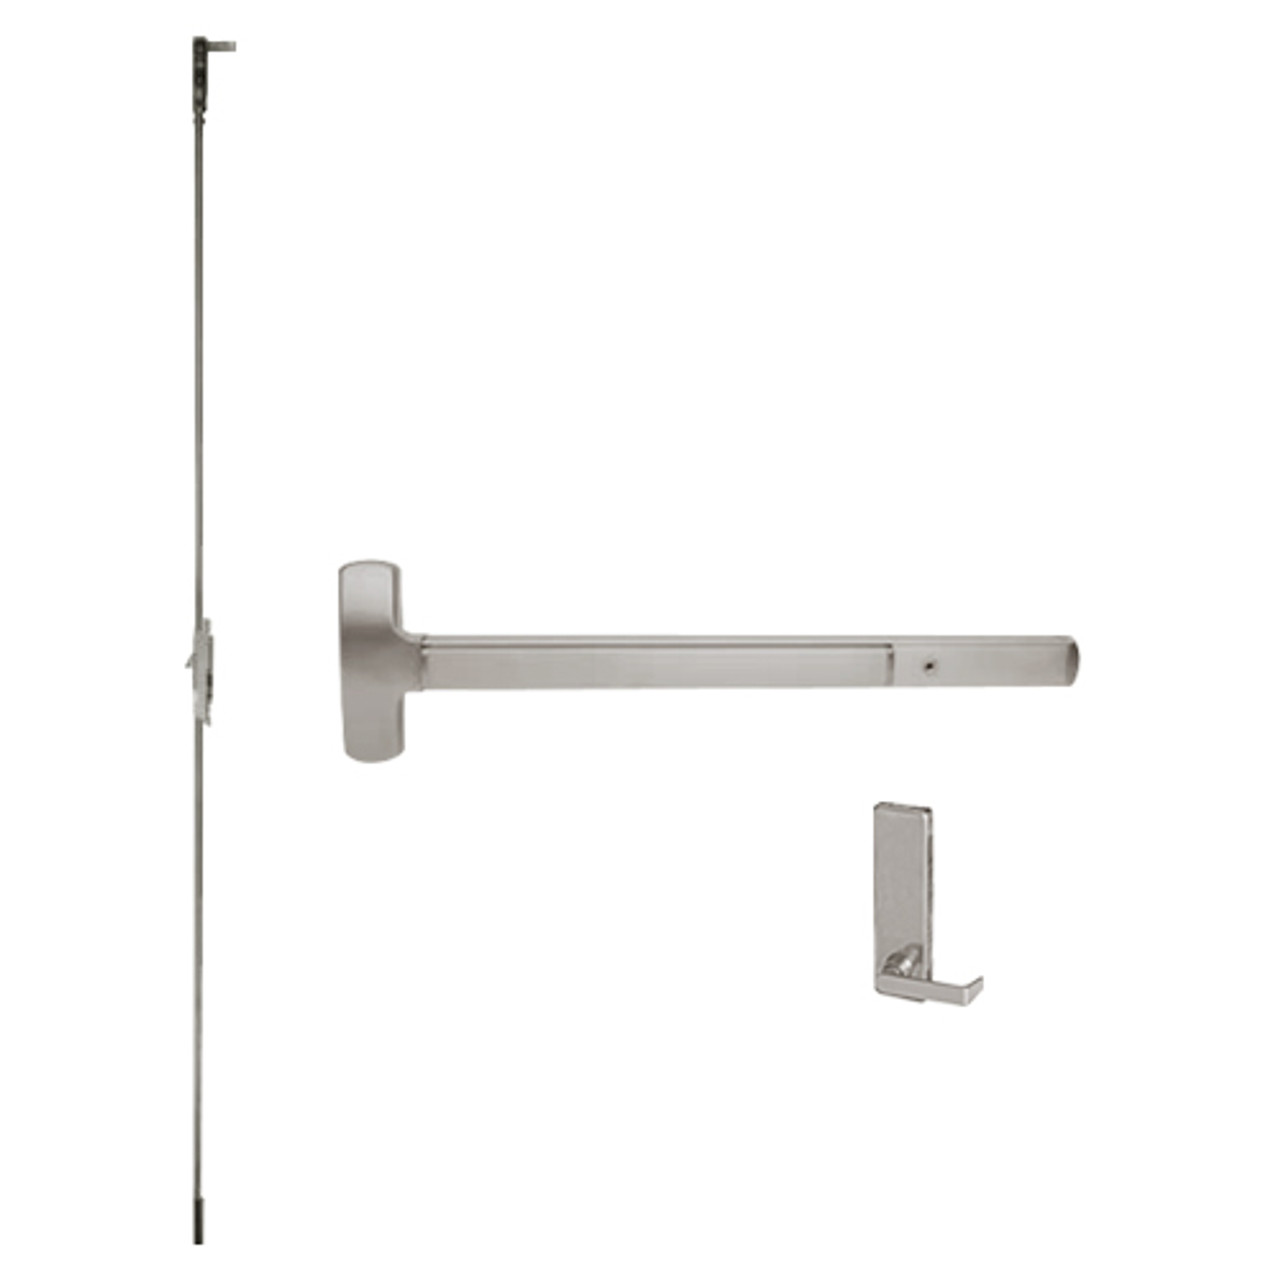 25-C-L-DT-DANE-US32D-4-LHR Falcon Exit Device in Satin Stainless Steel